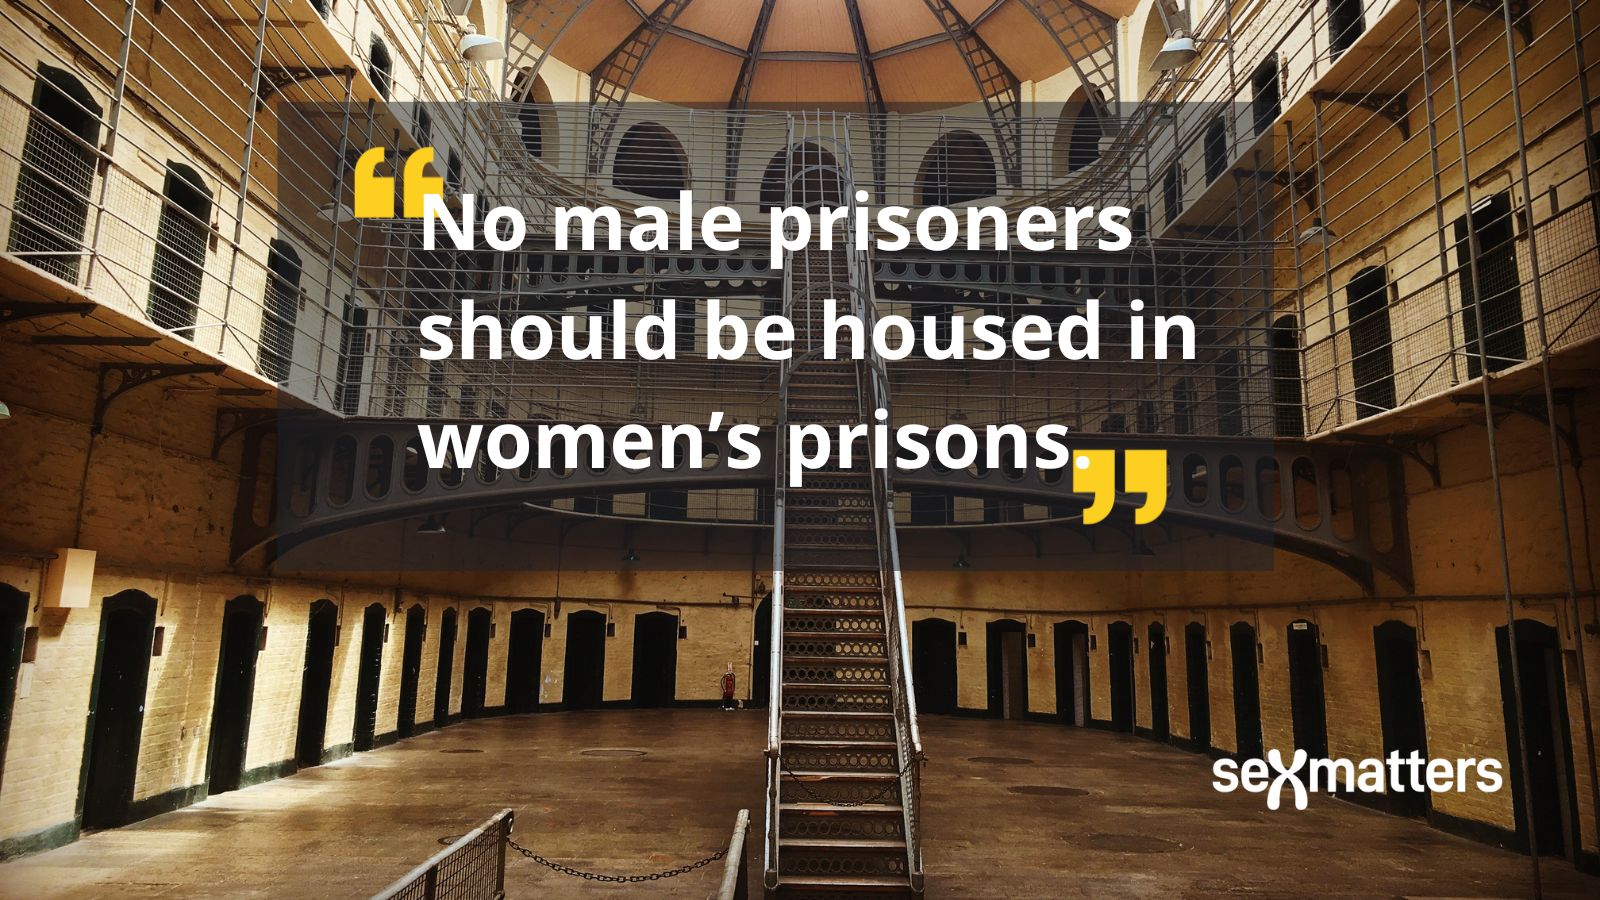 No male prisoners should be housed in women’s prisons.